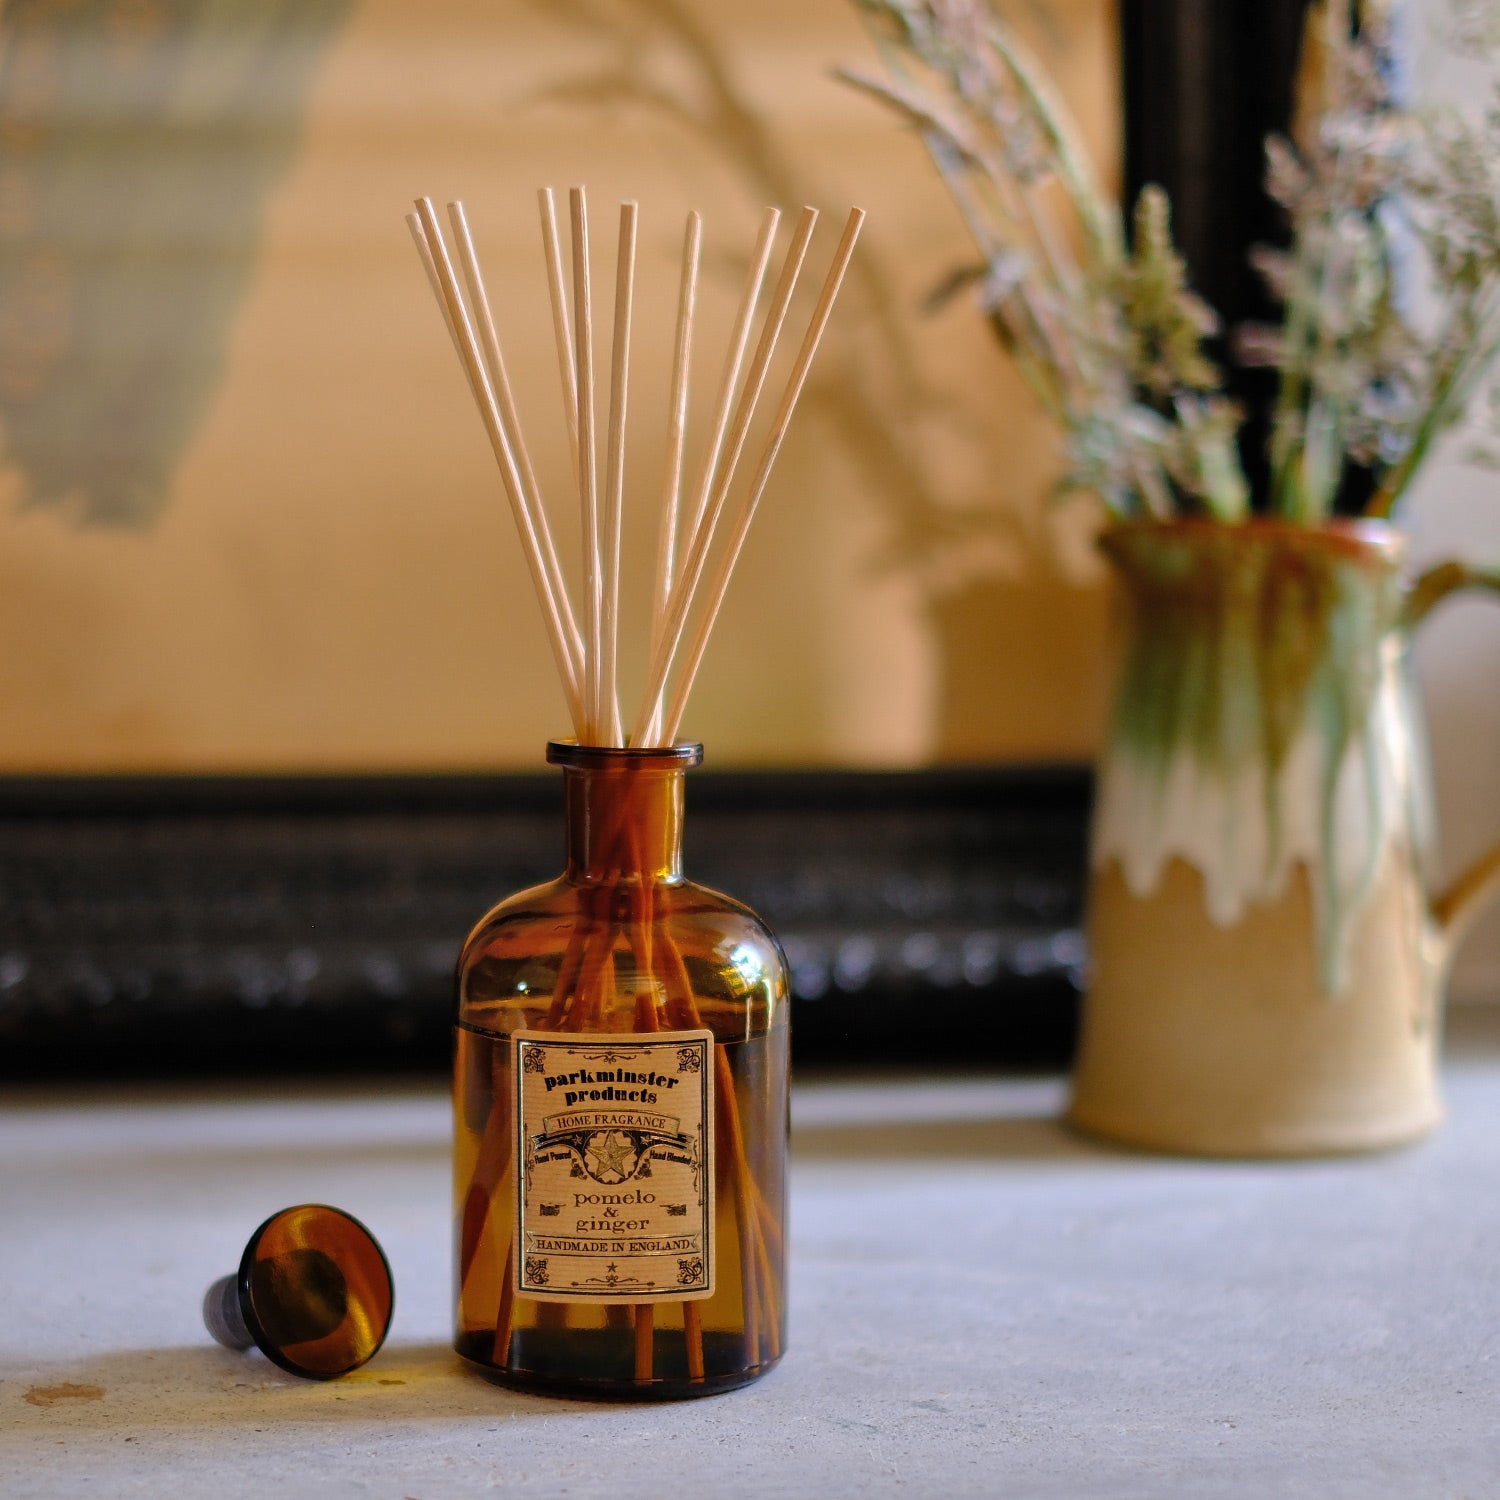 Infuse your home with the lively scent of Pomelo & Ginger using the Amber Glass Apothecary Collection 200ml Reed Diffusers by Parkminster Home Fragrance Co (Cornwall). These diffusers offer a rich blend of citrus and spice, perfect for a refreshing and warm ambiance.